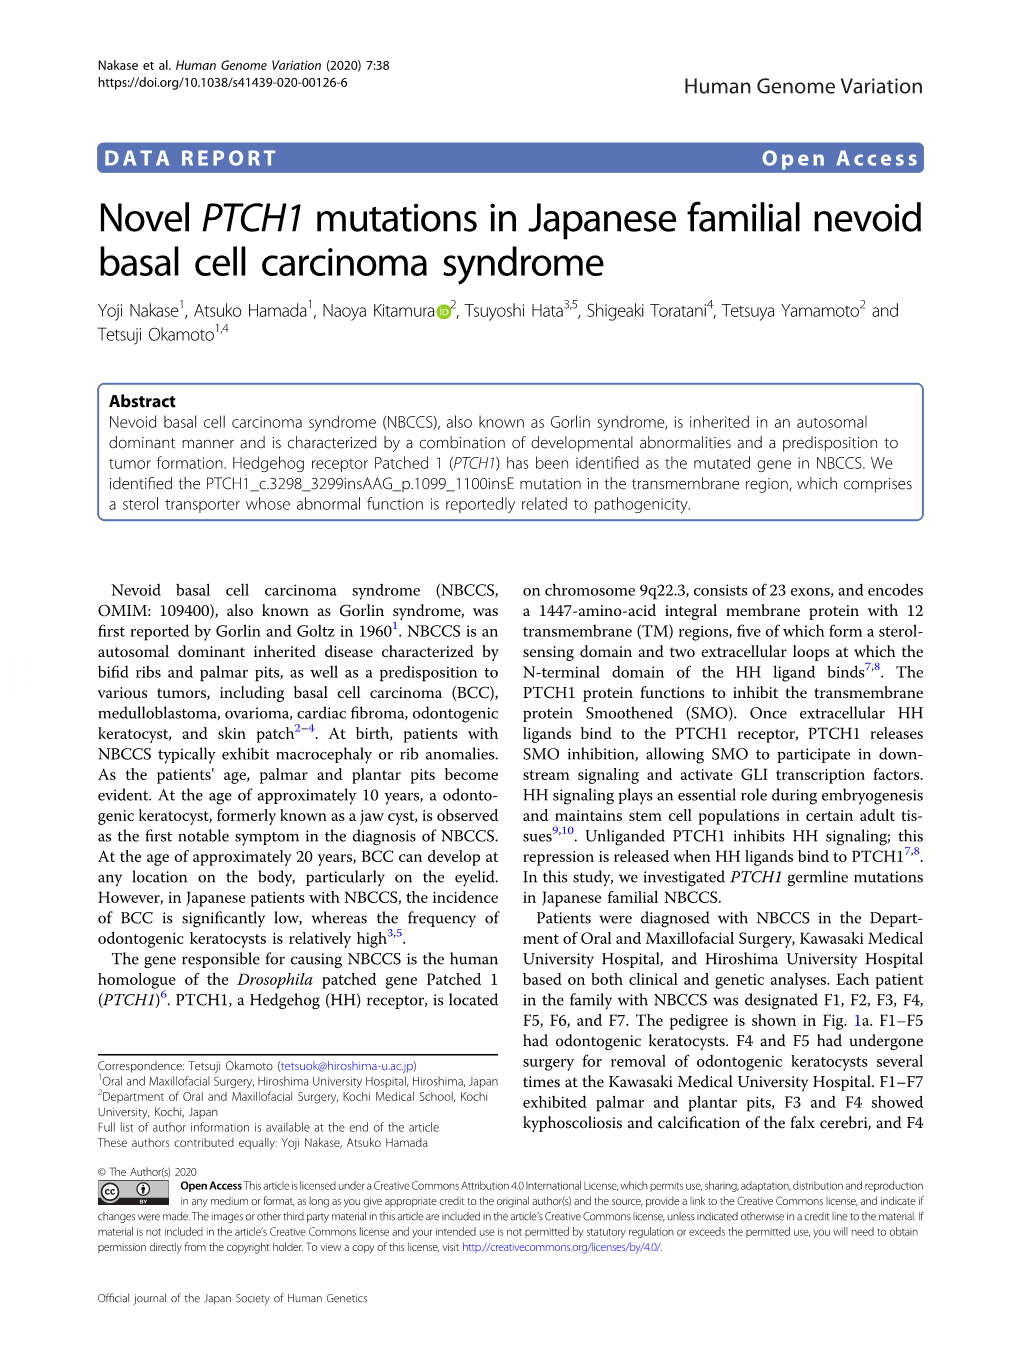 Novel PTCH1 Mutations in Japanese Familial Nevoid Basal Cell Carcinoma